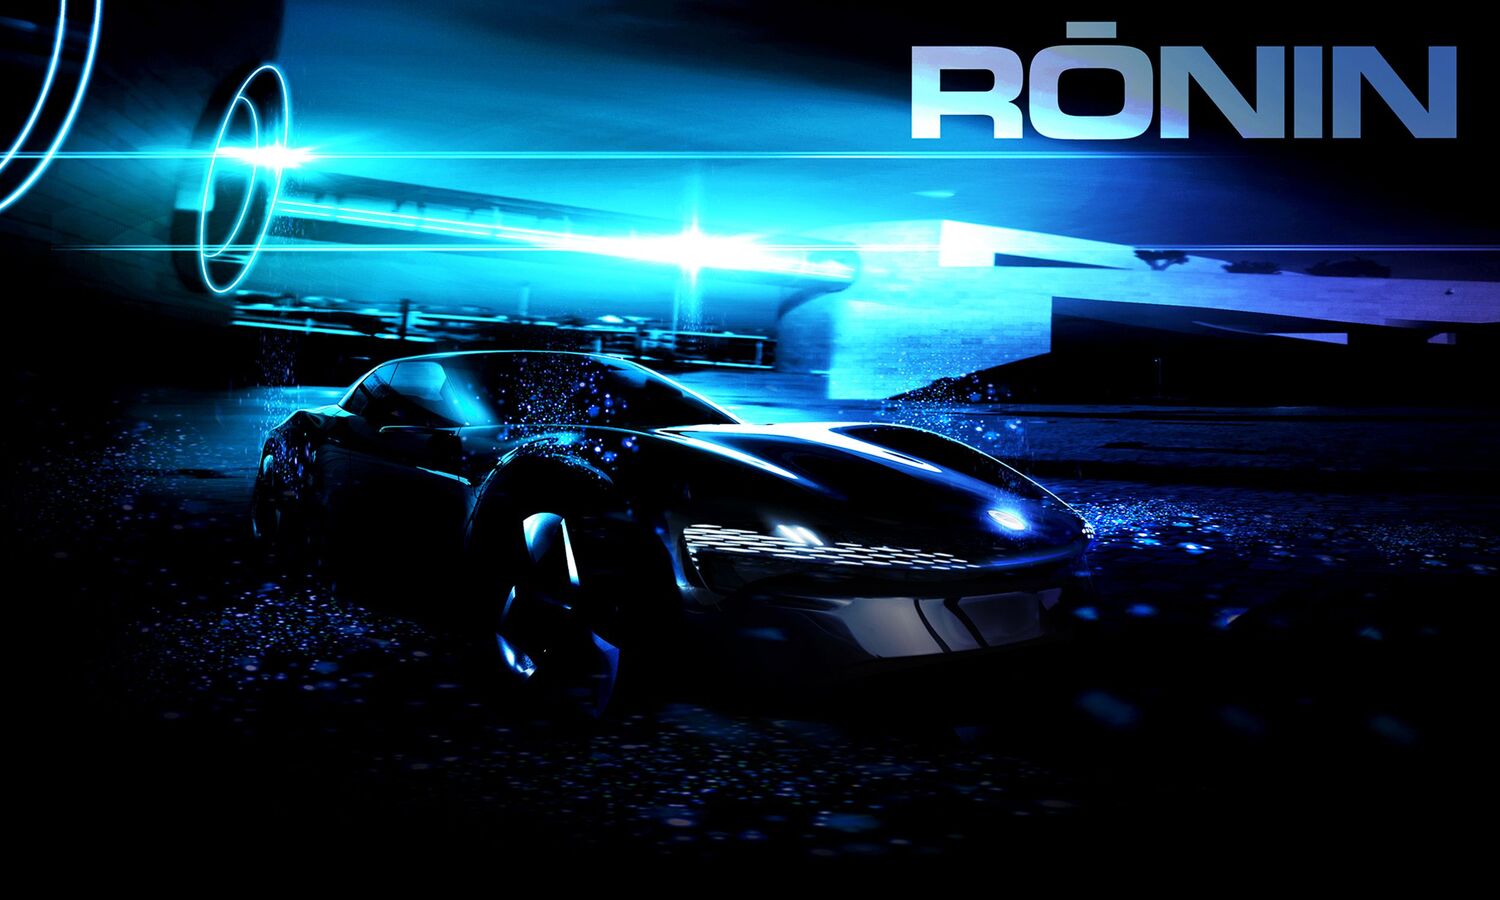 Fisker Ronin - Fisker announces its third product, Project Ronin, an innovate, high-tech electric GT Sports Car